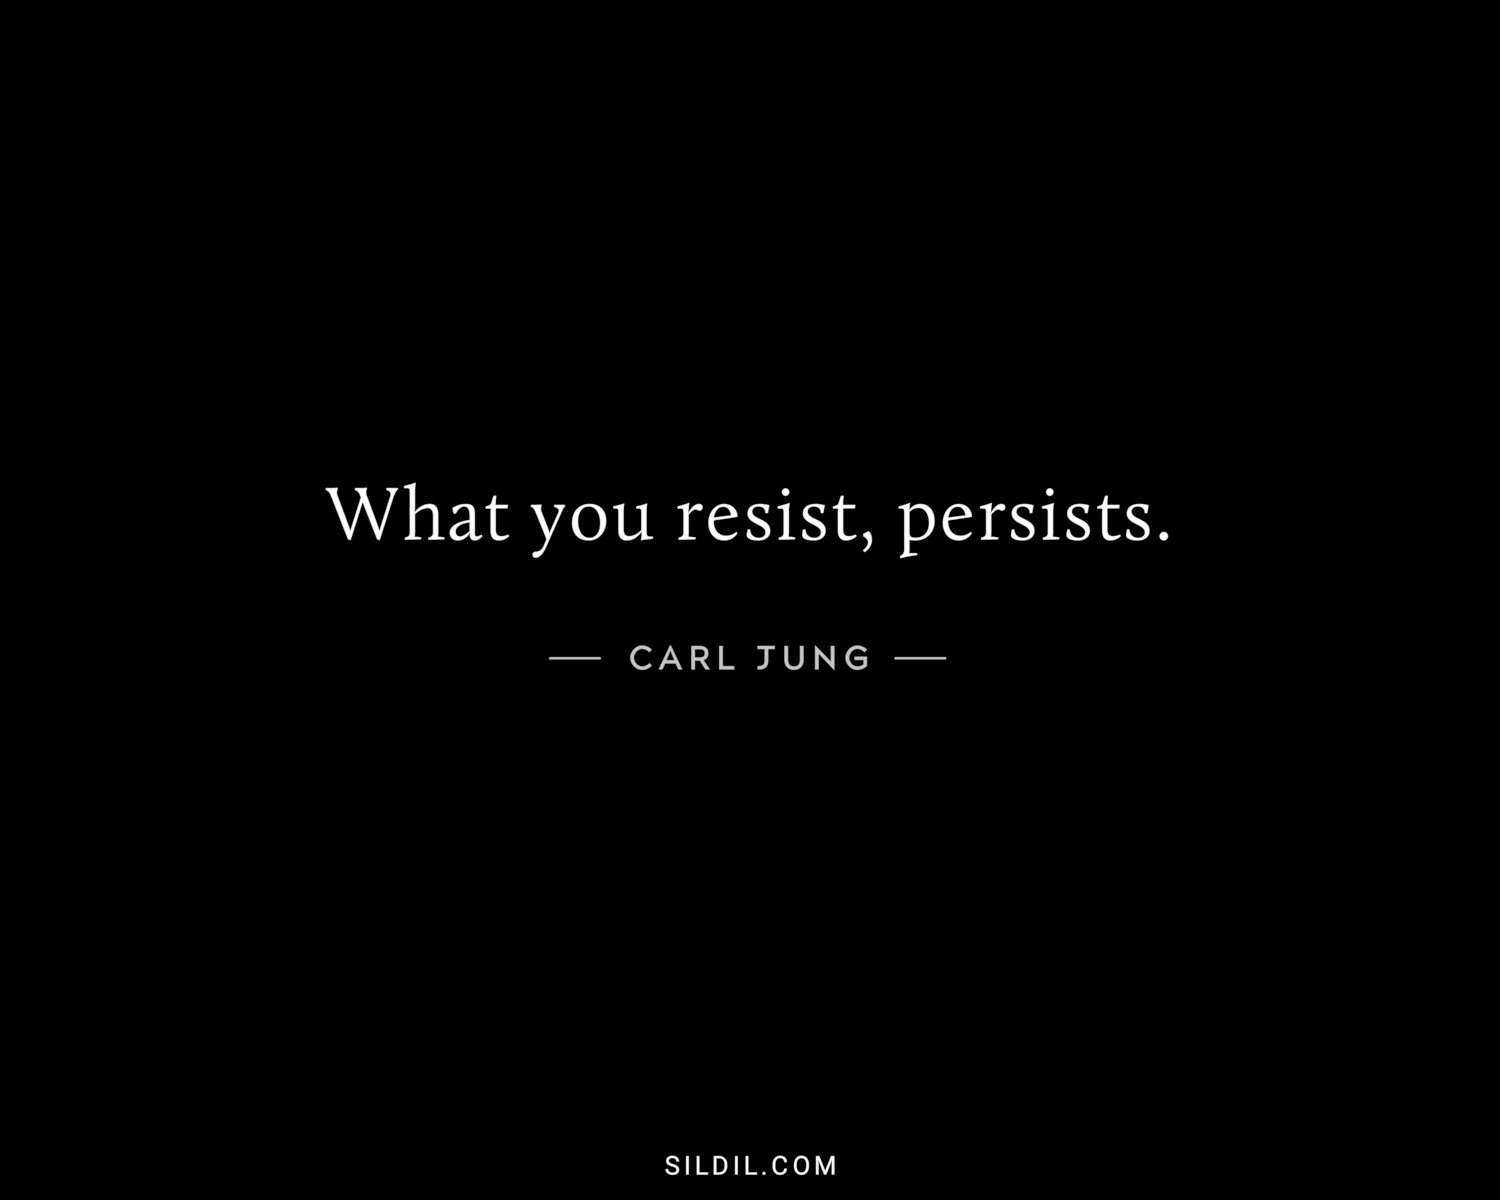 What you resist, persists.